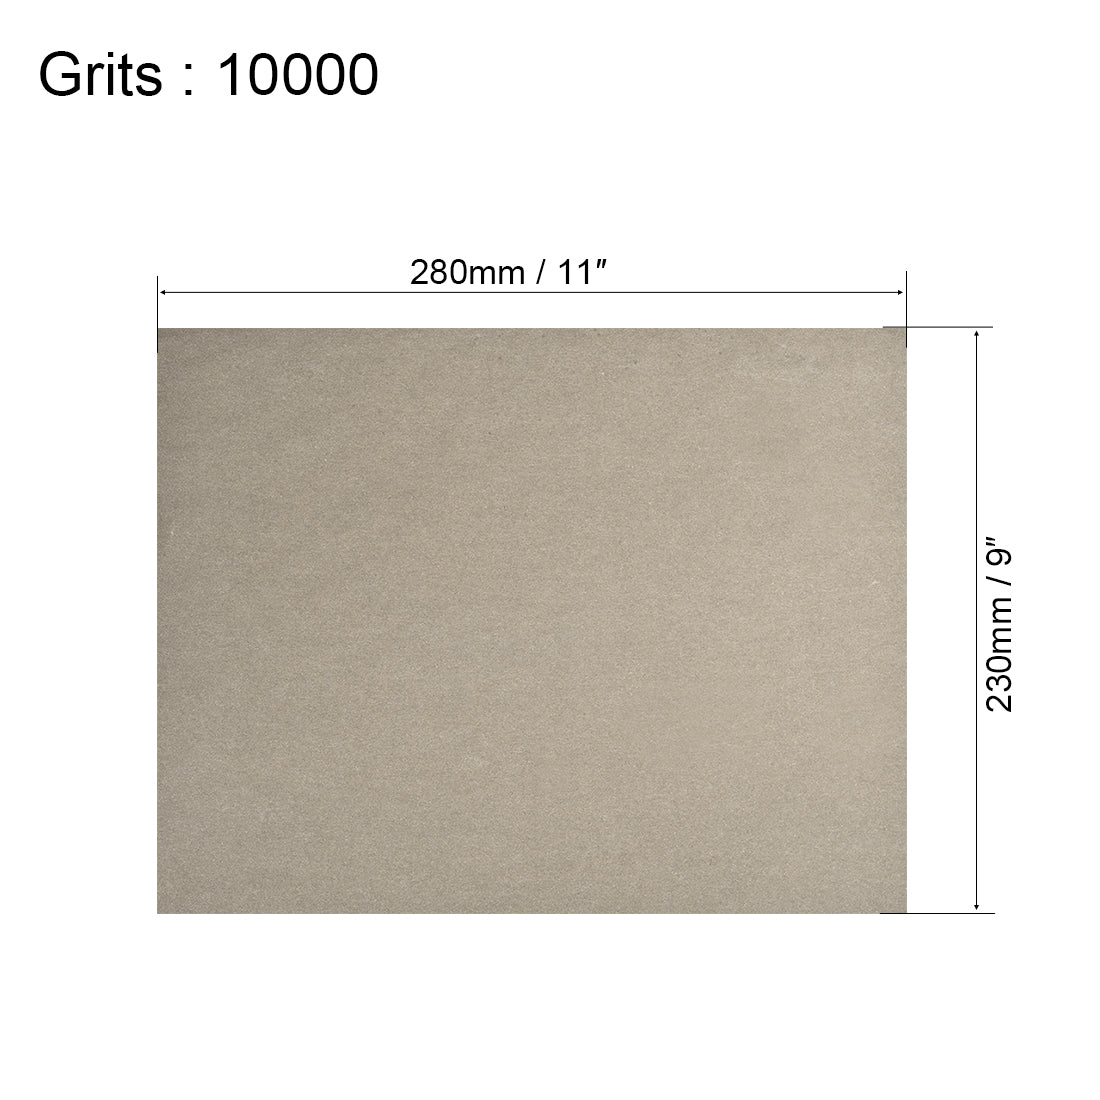 Uxcell Uxcell 5pcs 7000 Grits Wet Dry Waterproof Sandpaper 9" x 11" Abrasive Paper Sheets